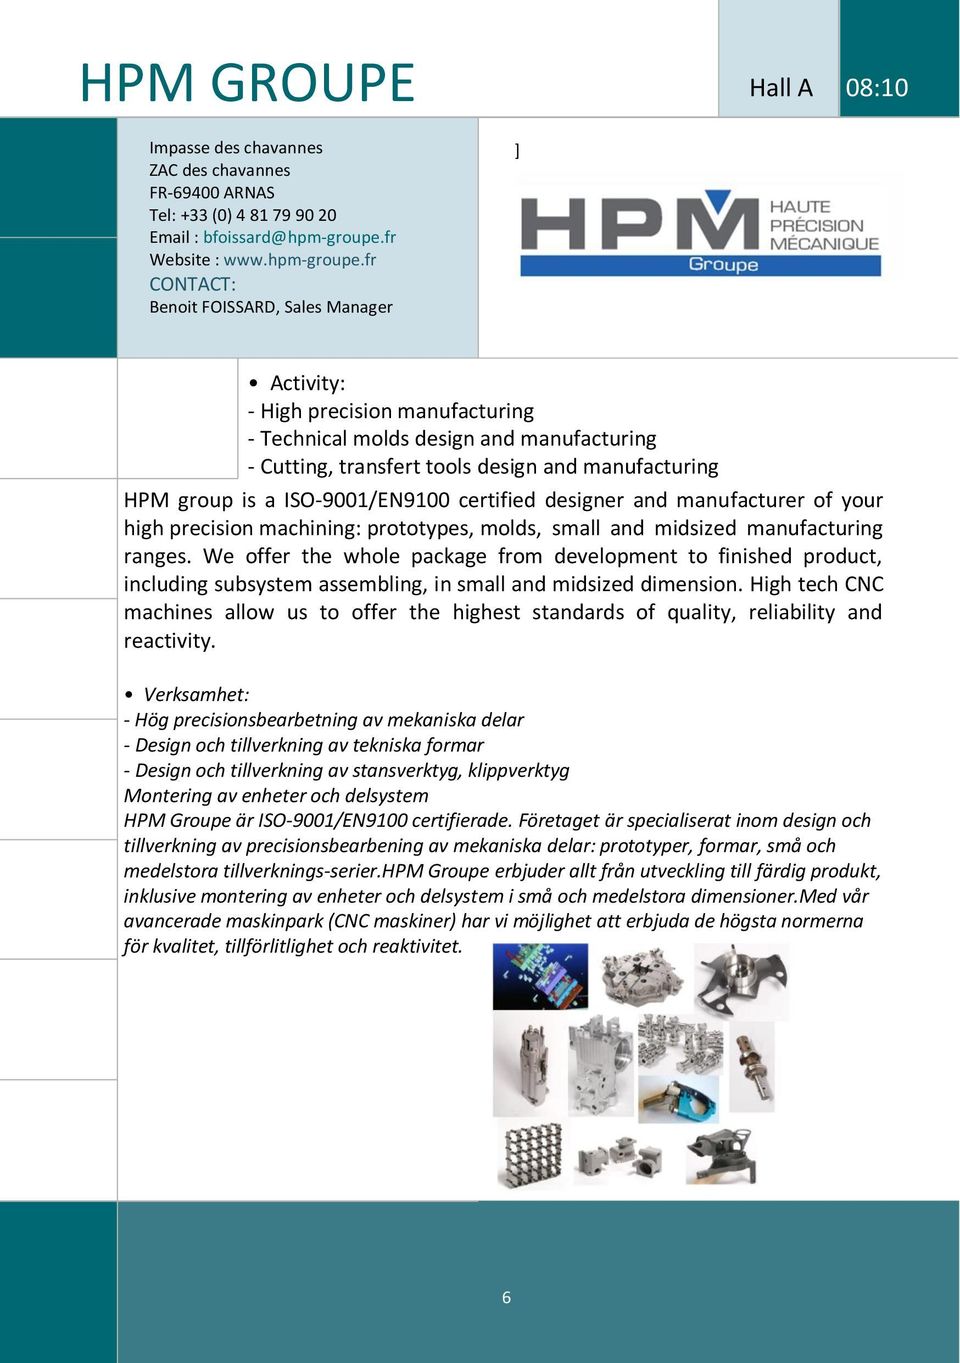 fr : Benoit FOISSARD, Sales Manager ] Activity: - High precision manufacturing - Technical molds design and manufacturing - Cutting, transfert tools design and manufacturing HPM group is a